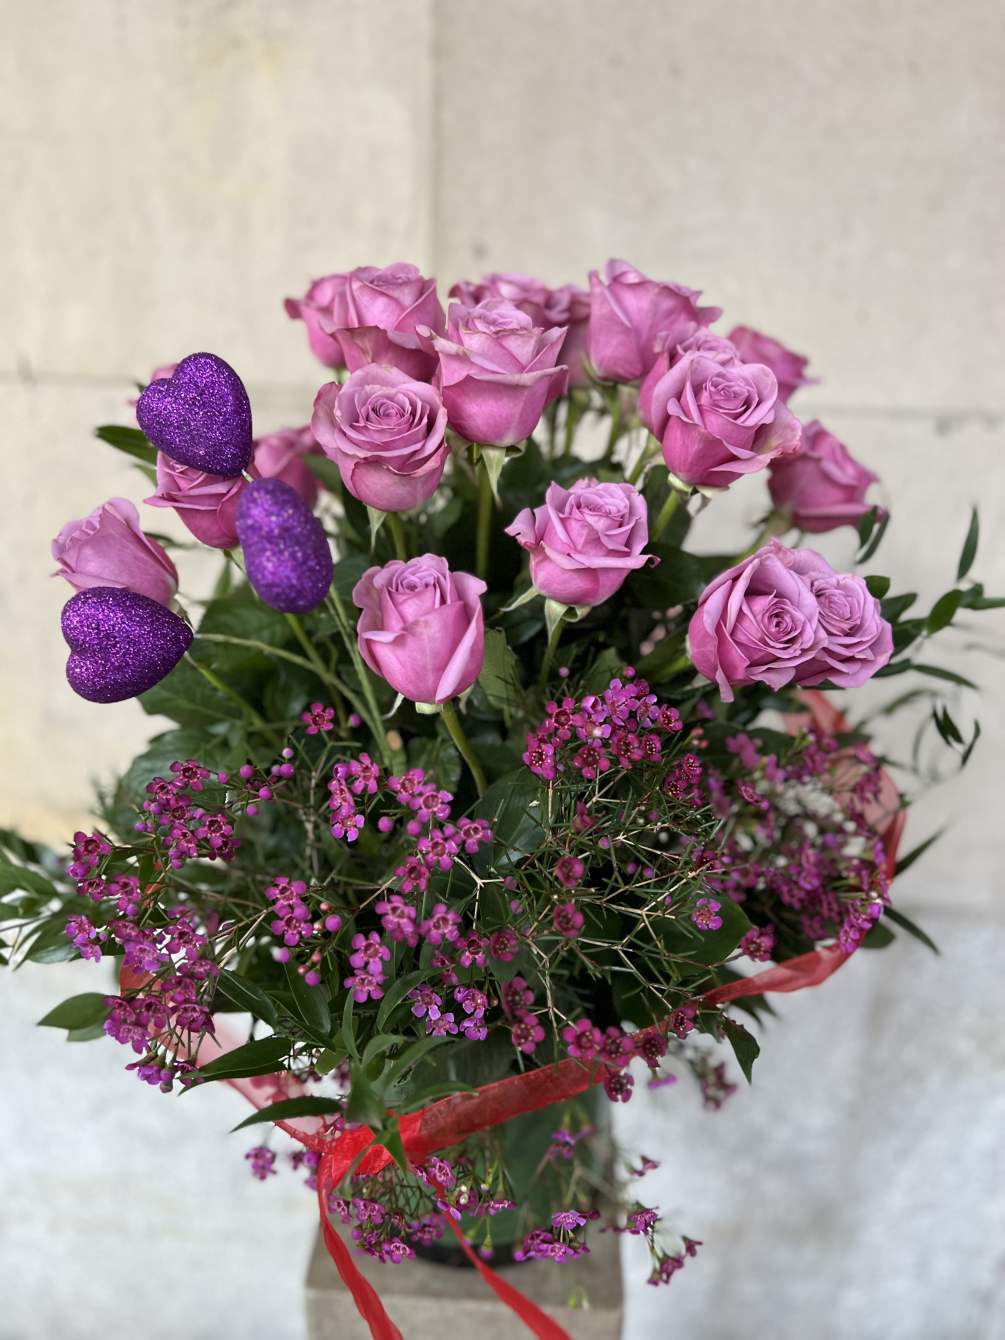 Flowers by Philip offer a flawless collection of long stemmed roses that